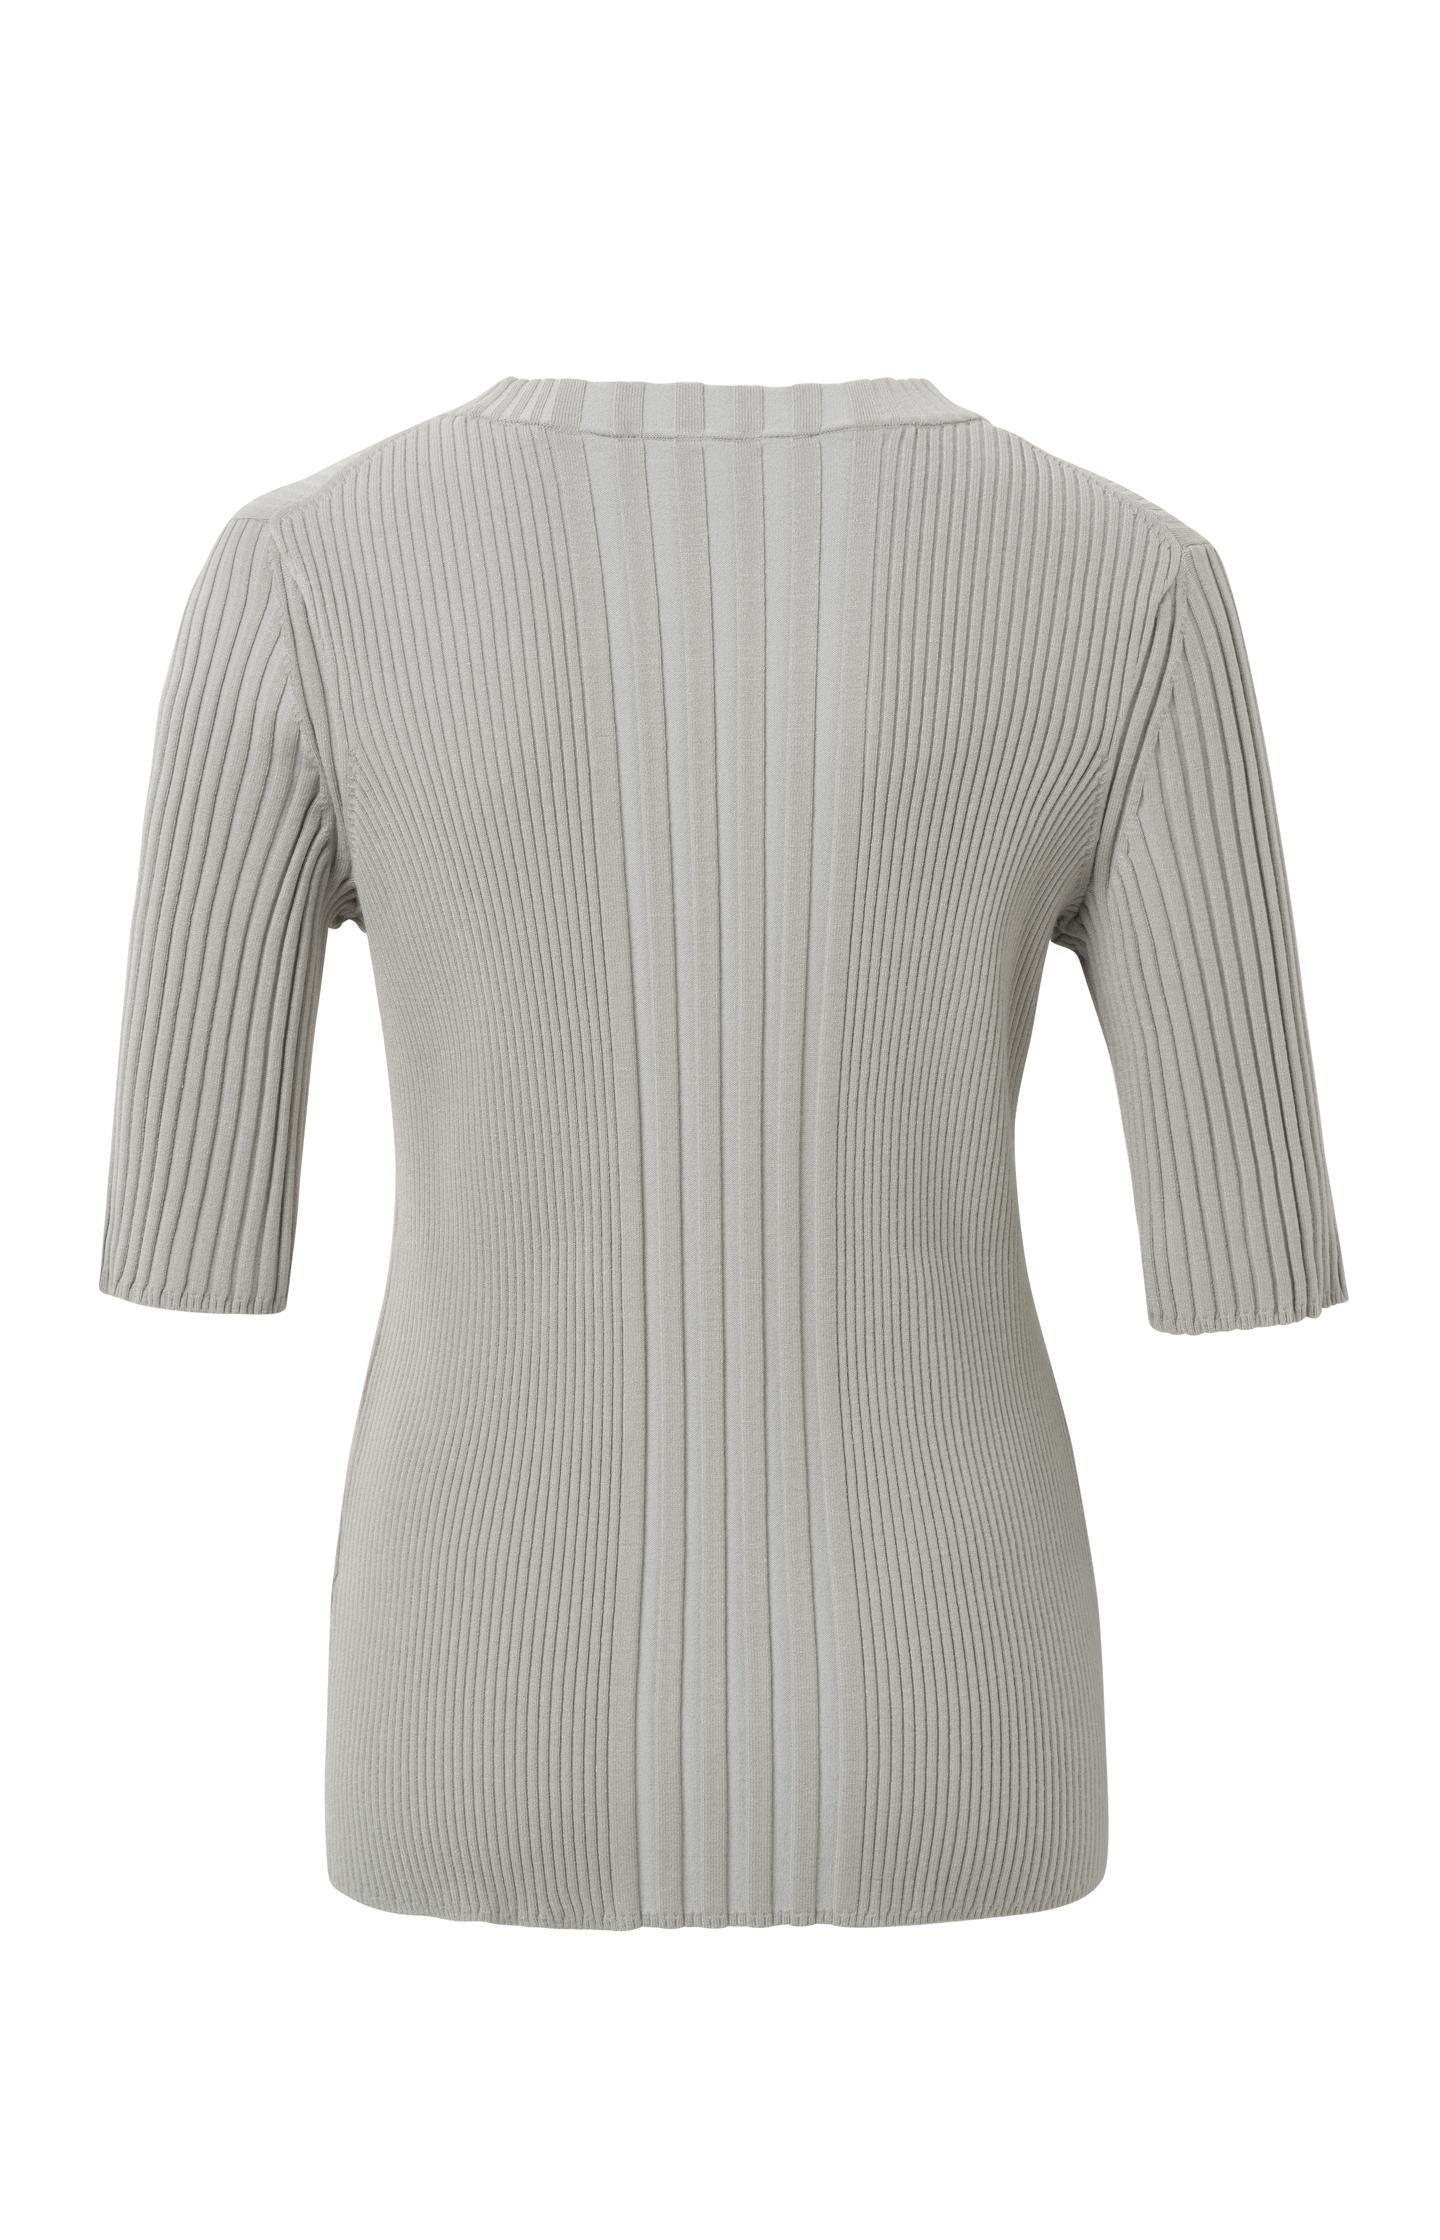 Ribbed sweater with crewneck, half sleeves and slit detail